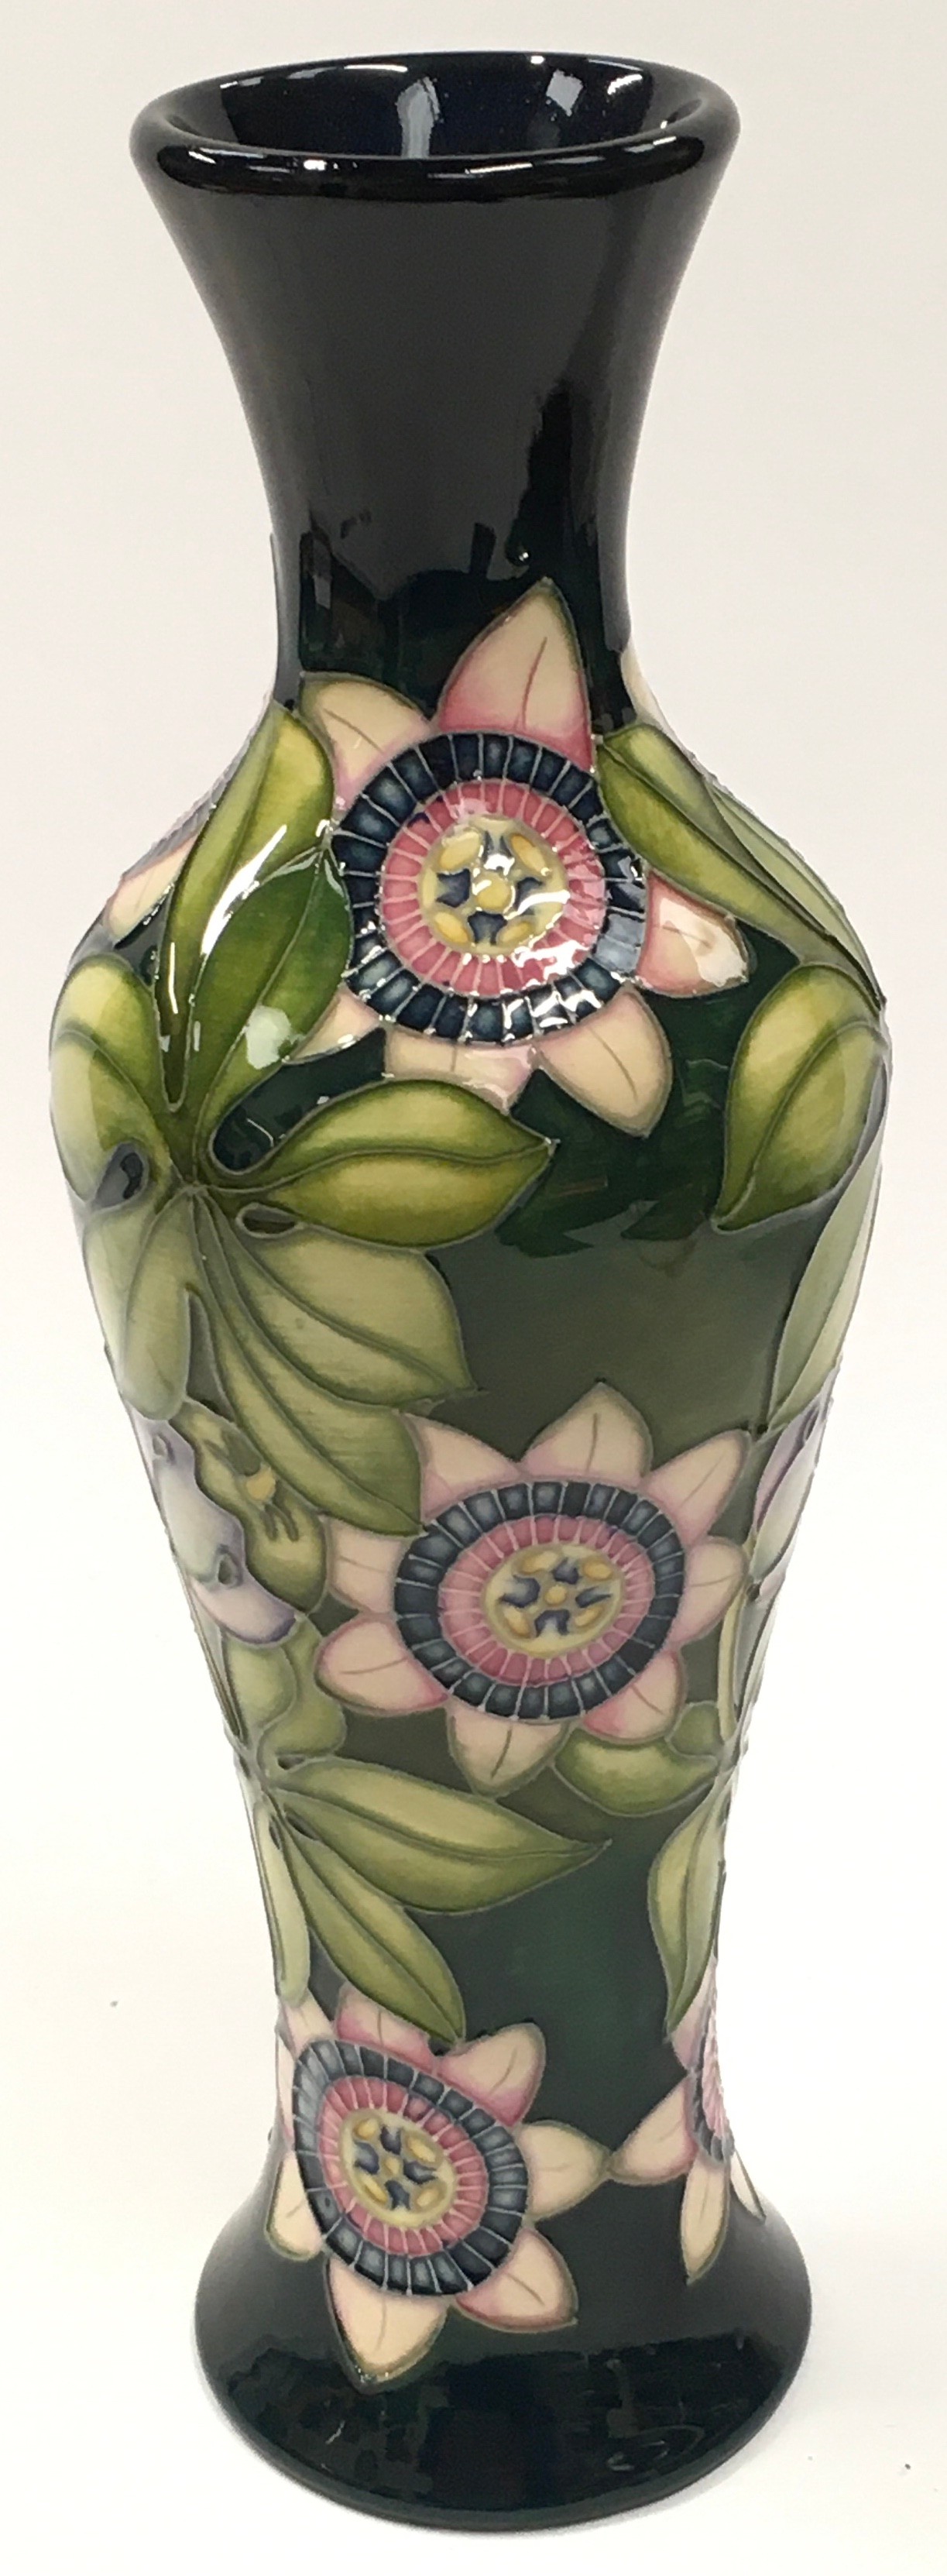 Moorcroft Trial vase 2015. 26cm tall. Signed and stamped to base.